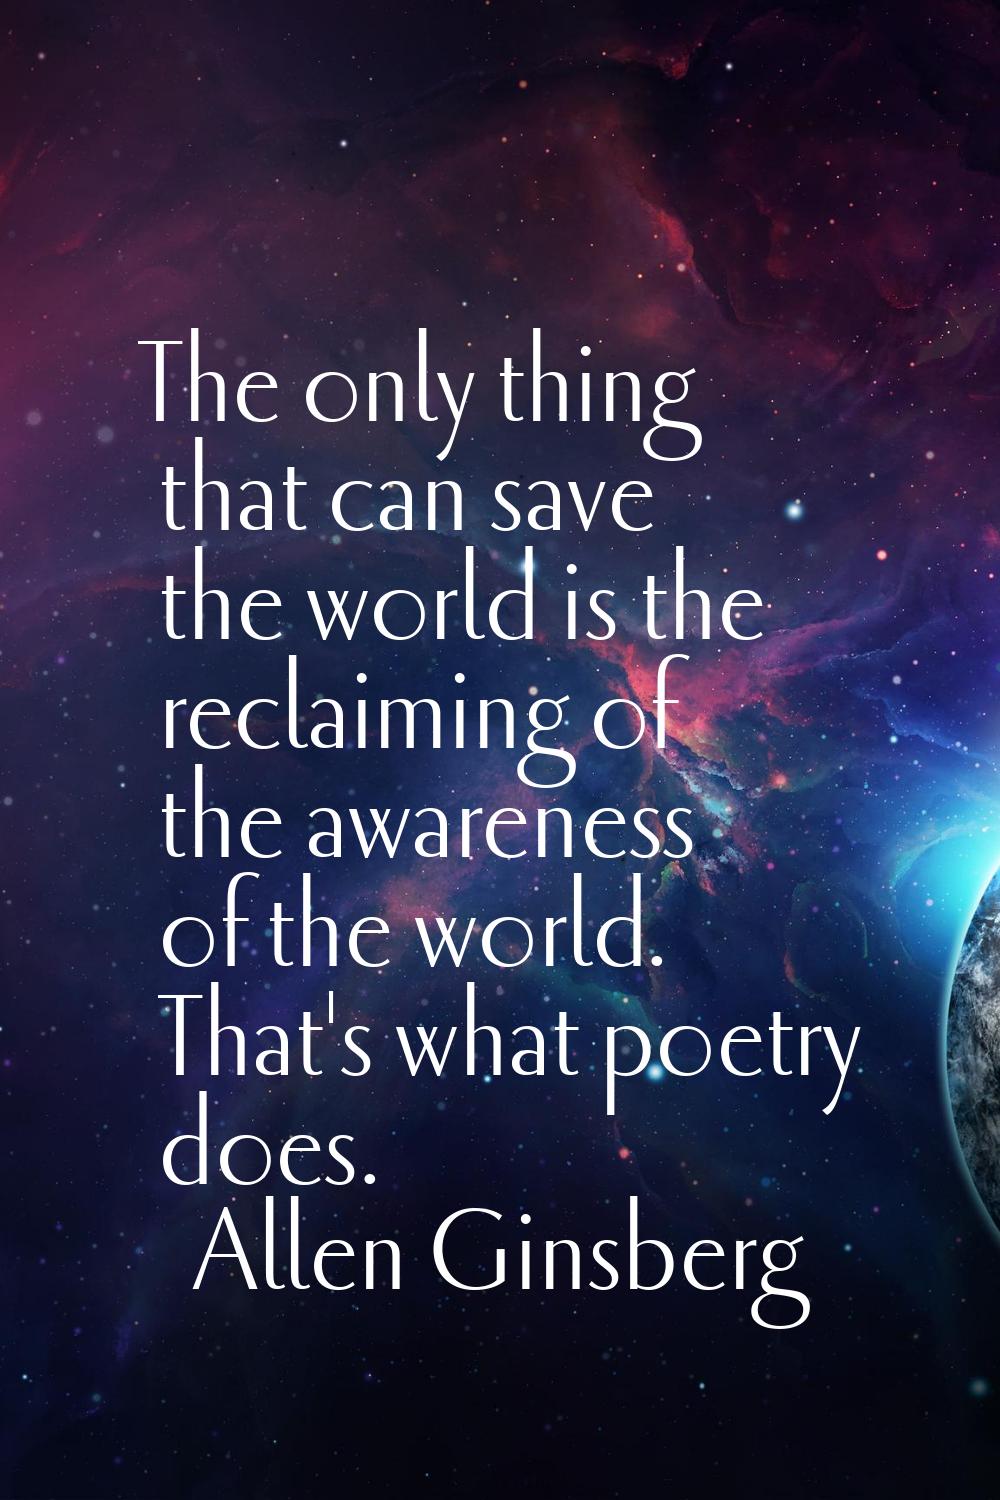 The only thing that can save the world is the reclaiming of the awareness of the world. That's what